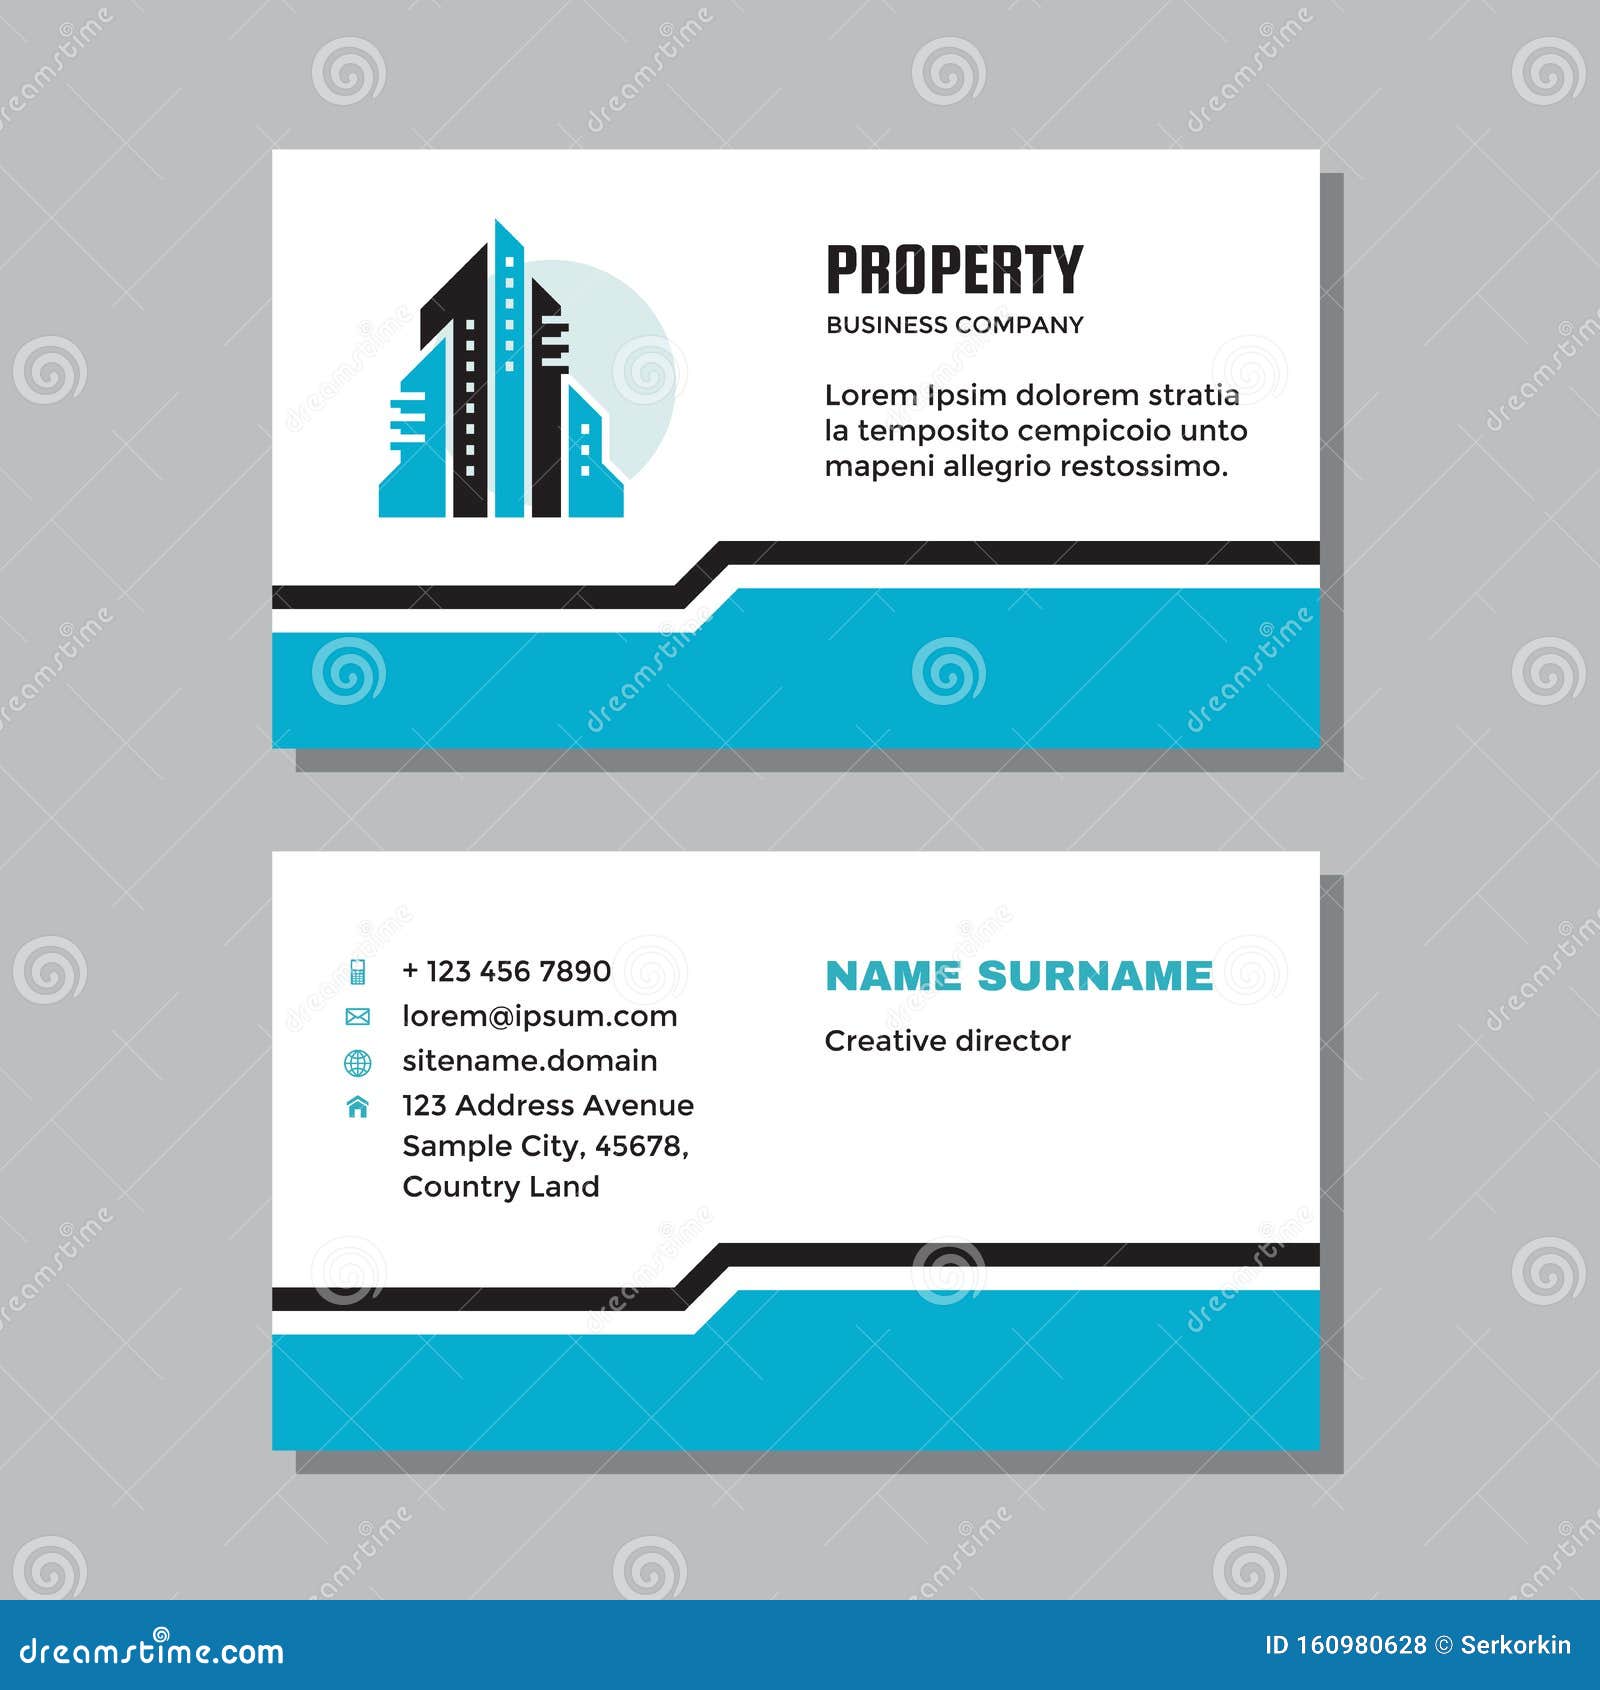 Business Visit Card Template with Logo - Concept Design. Real Pertaining To Real Estate Business Cards Templates Free